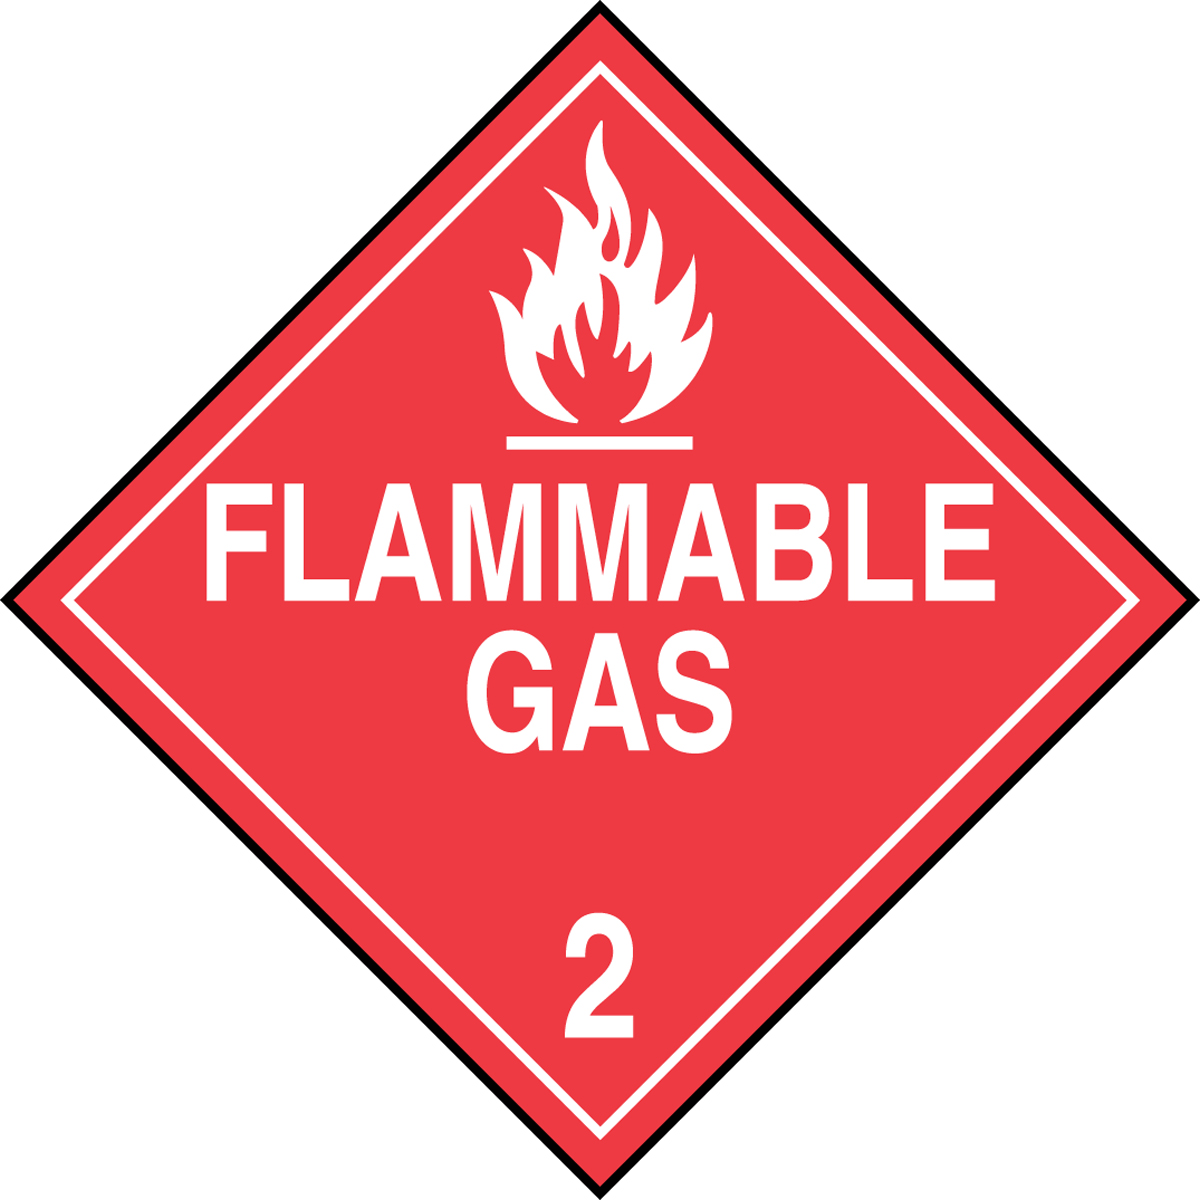 FLAMMABLE GAS (W/ GRAPHIC)